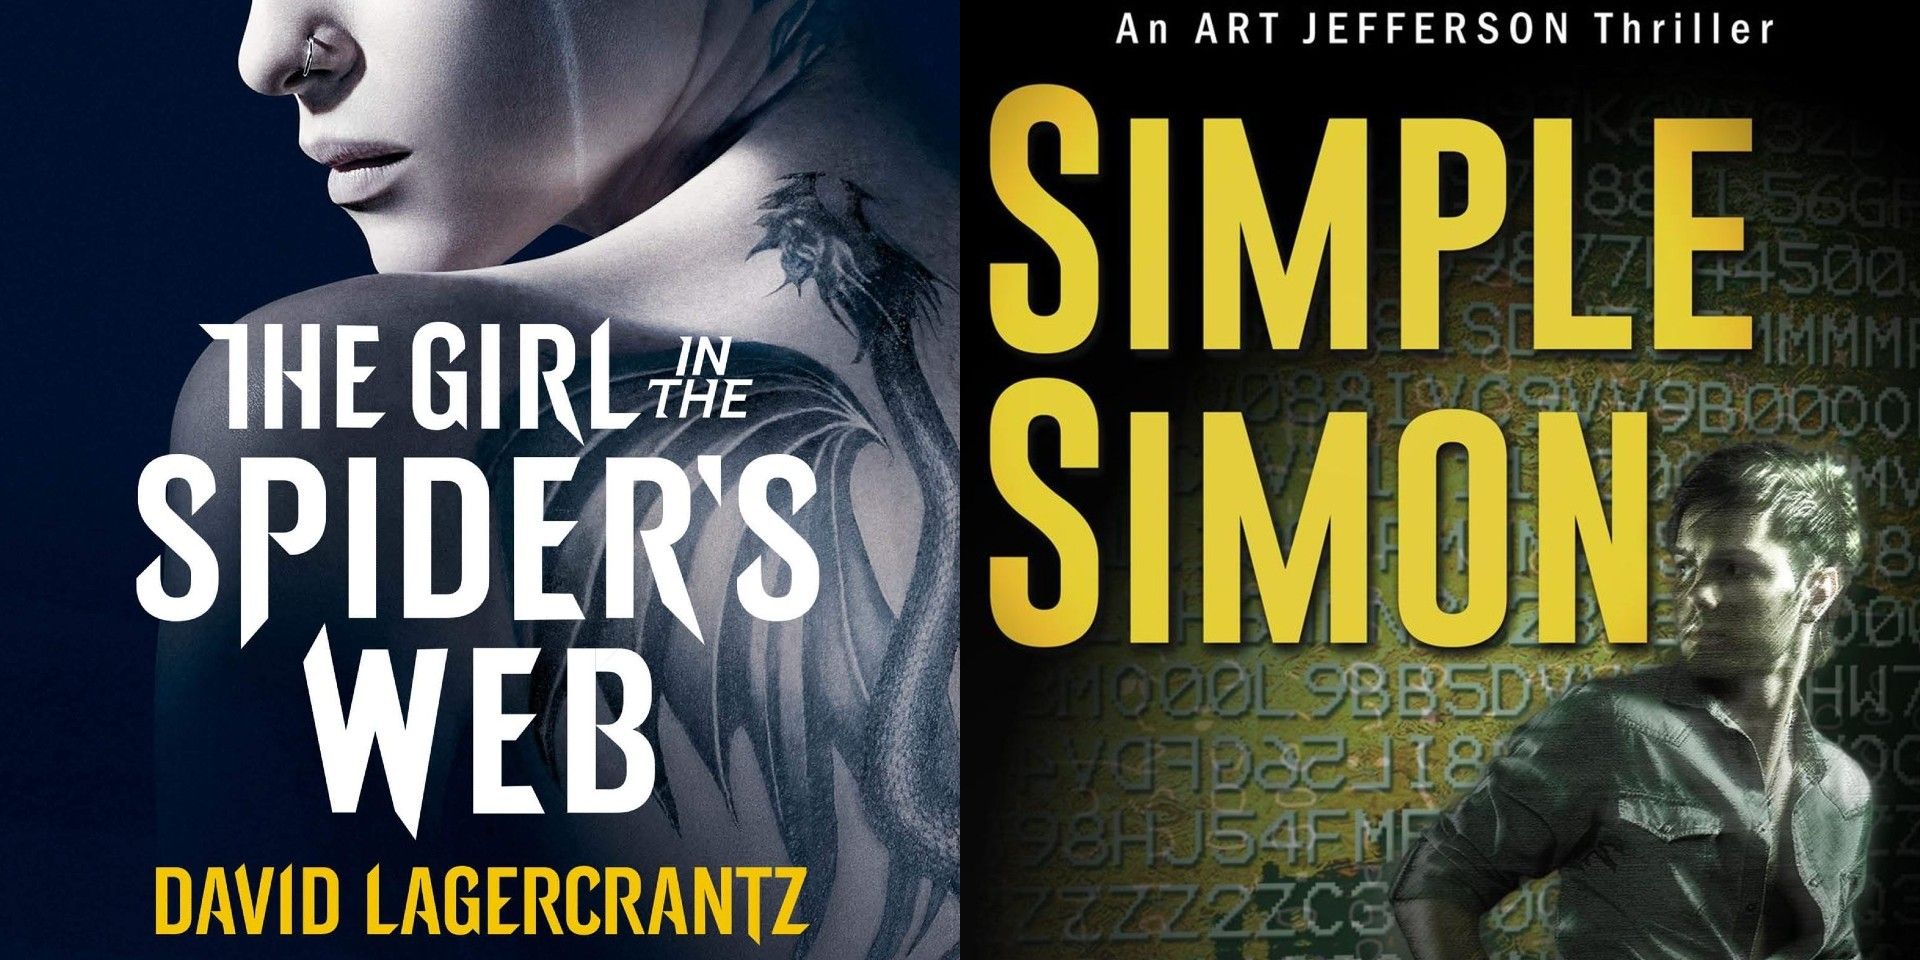 The Girl In The Spider's Web by David Lagercrantz; Simple Simon by Ryne Douglas Pearson